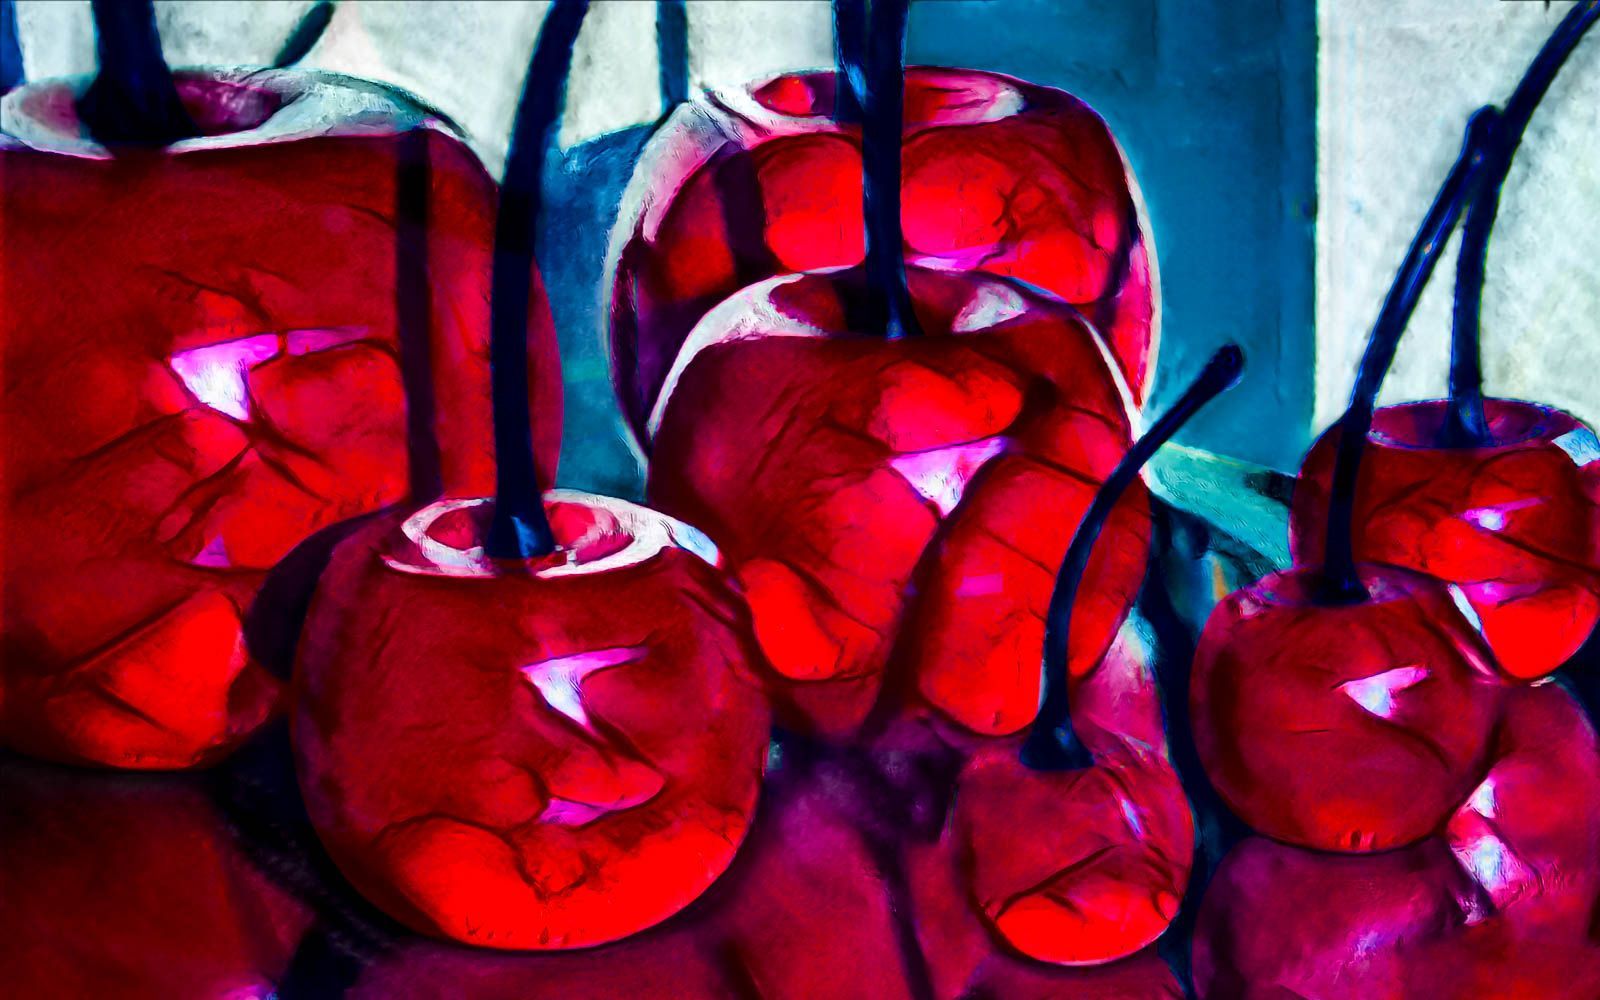 a photo illustration of red glass blown cherries with black stems